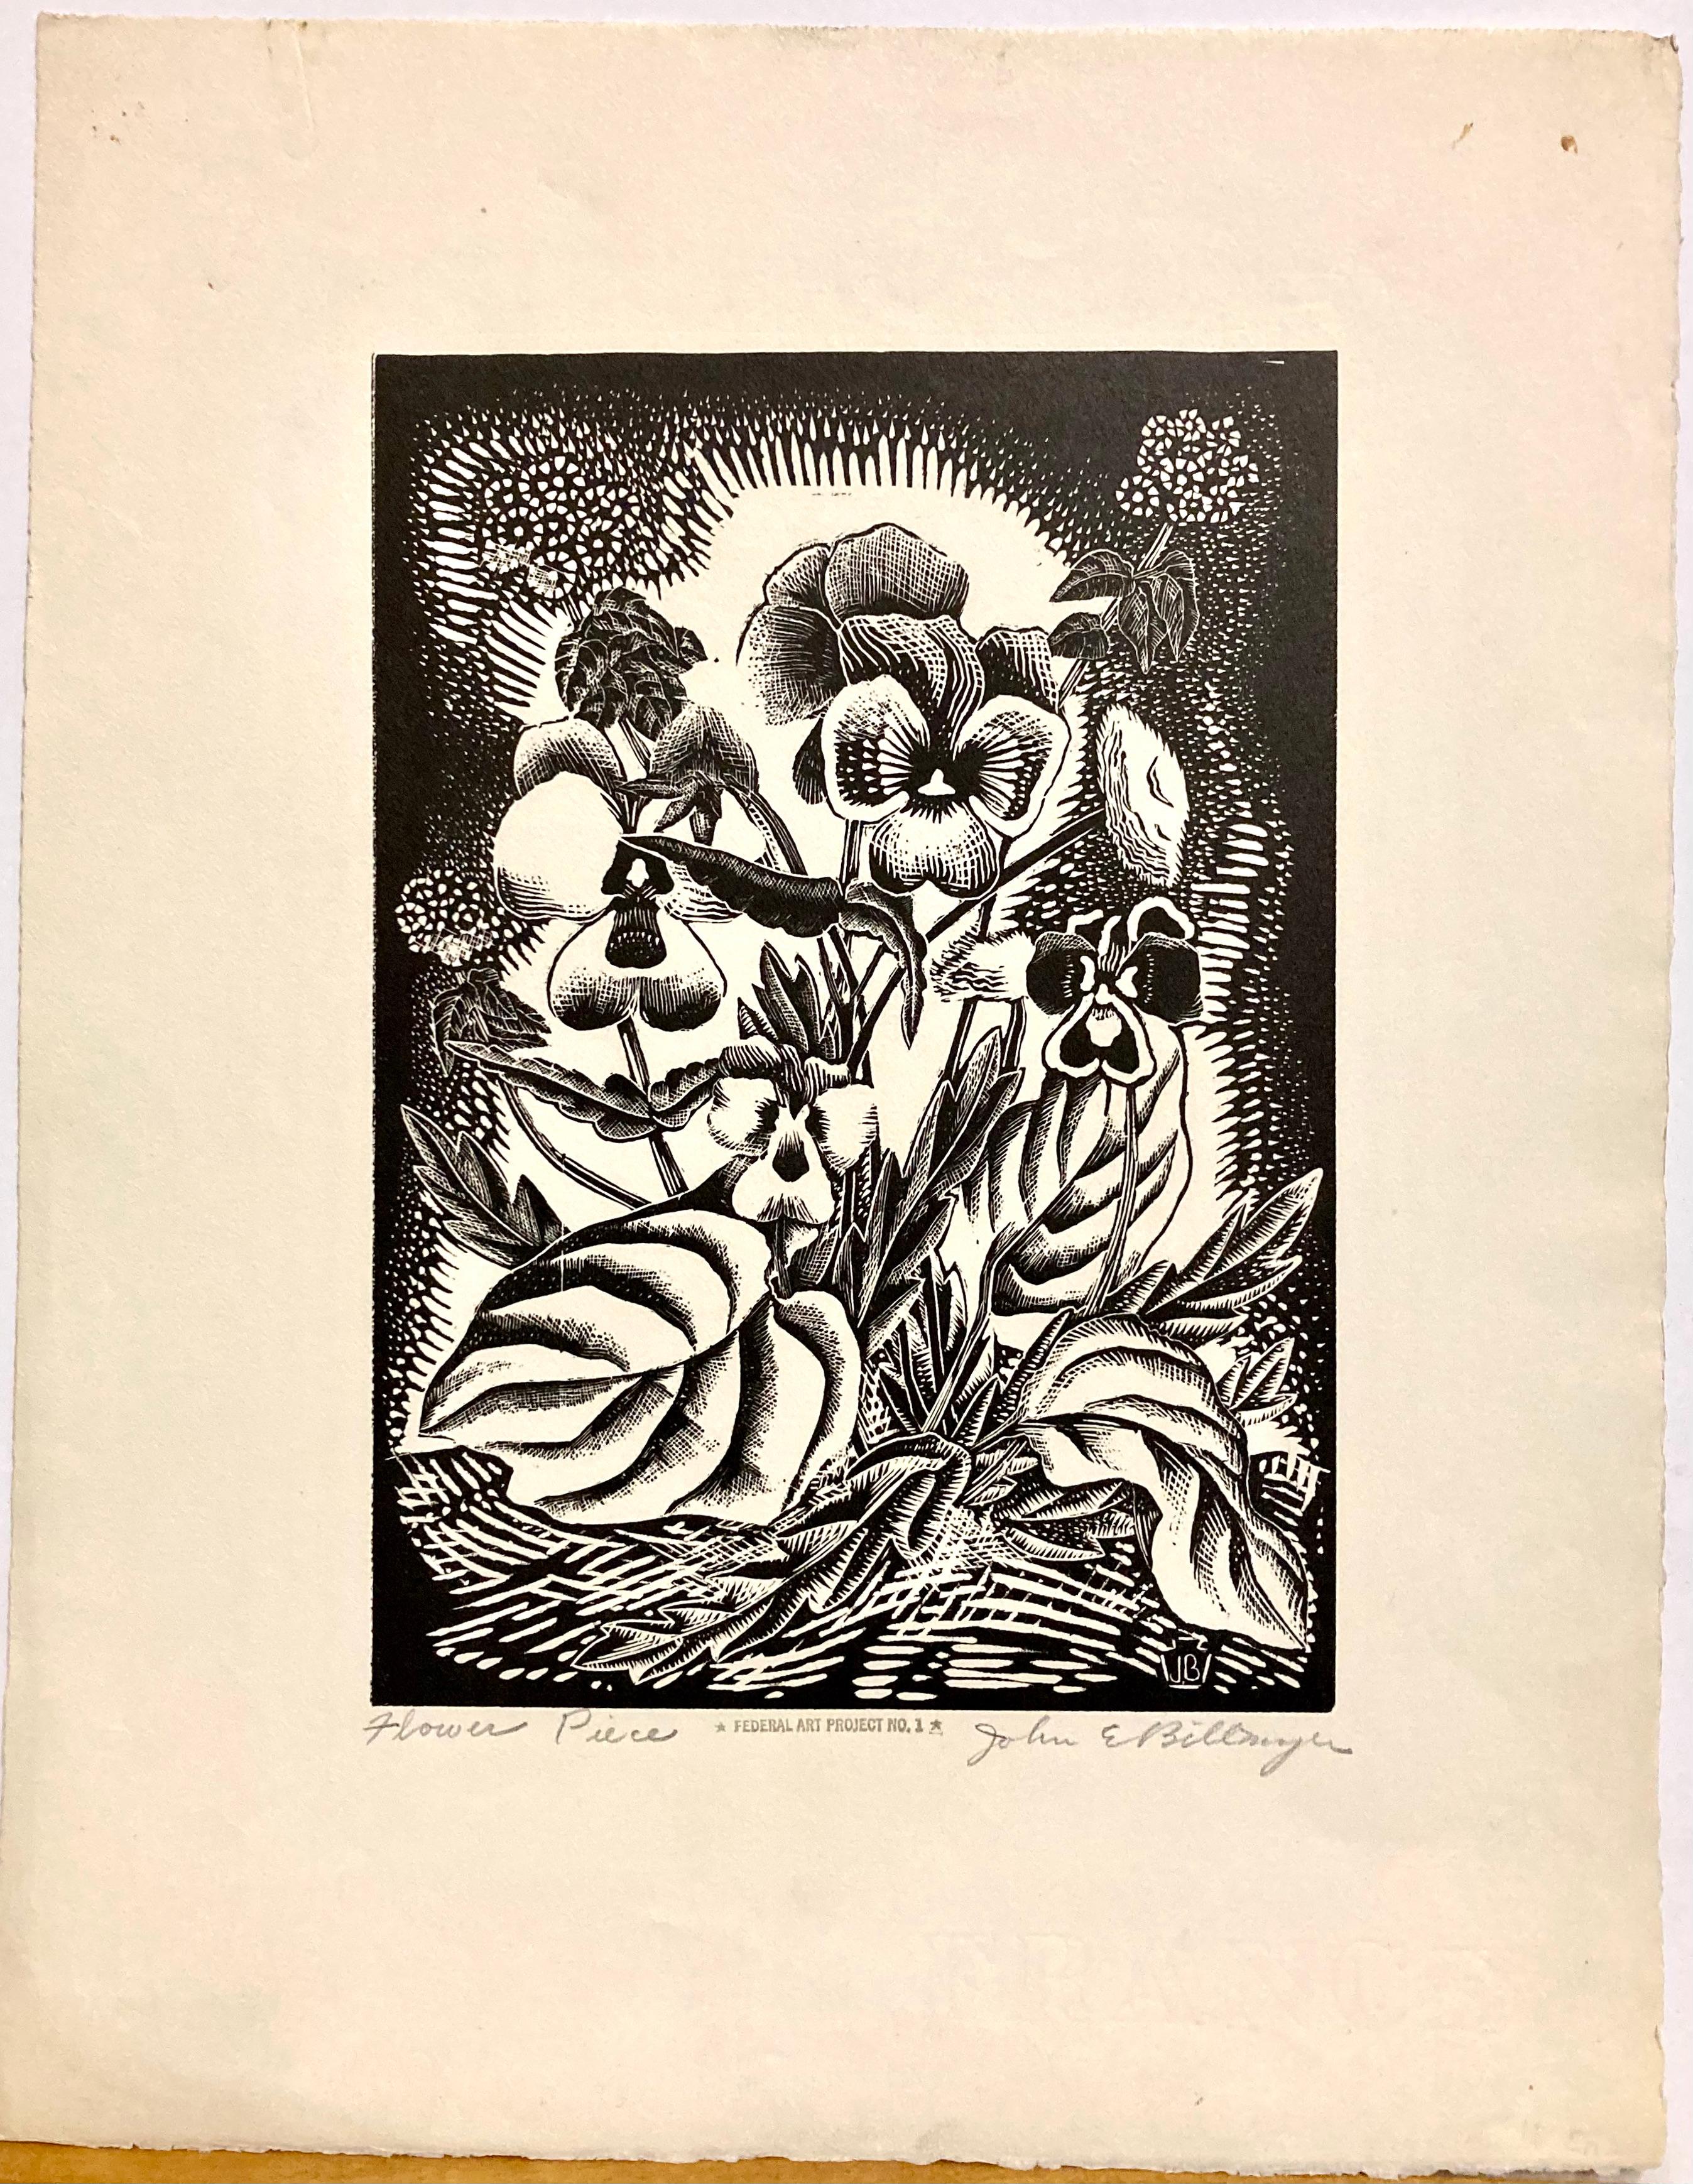 'Flower Piece' shows the artist, John Billmyer, to be a highly accomplished wood engraver. There are endless patterns and created details -- all executed flawlessly. Mostly made up of pansies (viola tricolor) or 'Johnnie-jump-ups,' the composition